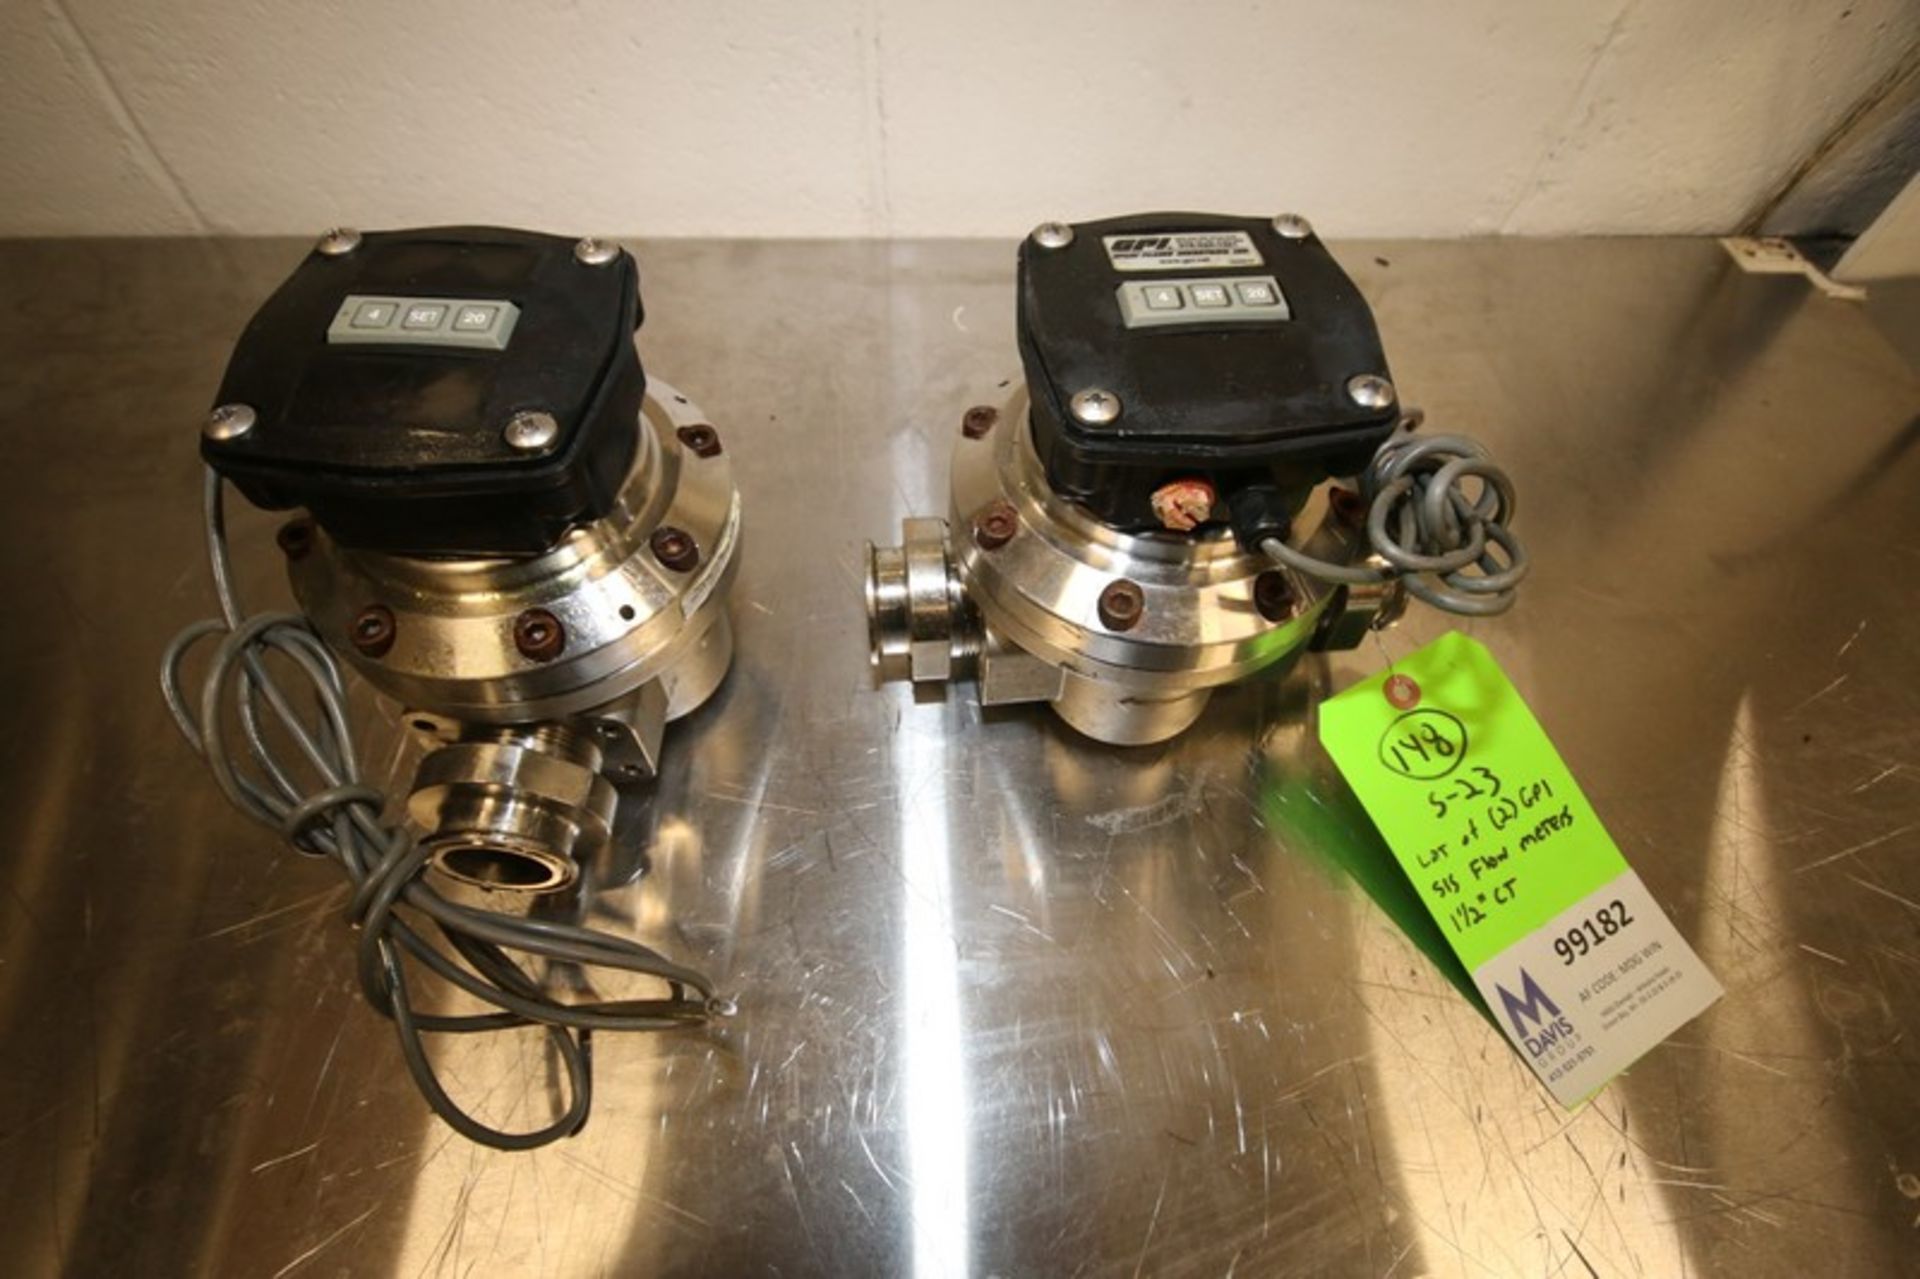 Lot of (2) GPI (Great Plains Industries) S/S Flow Meters, 1.5" Clamp Type, with On Board Digital